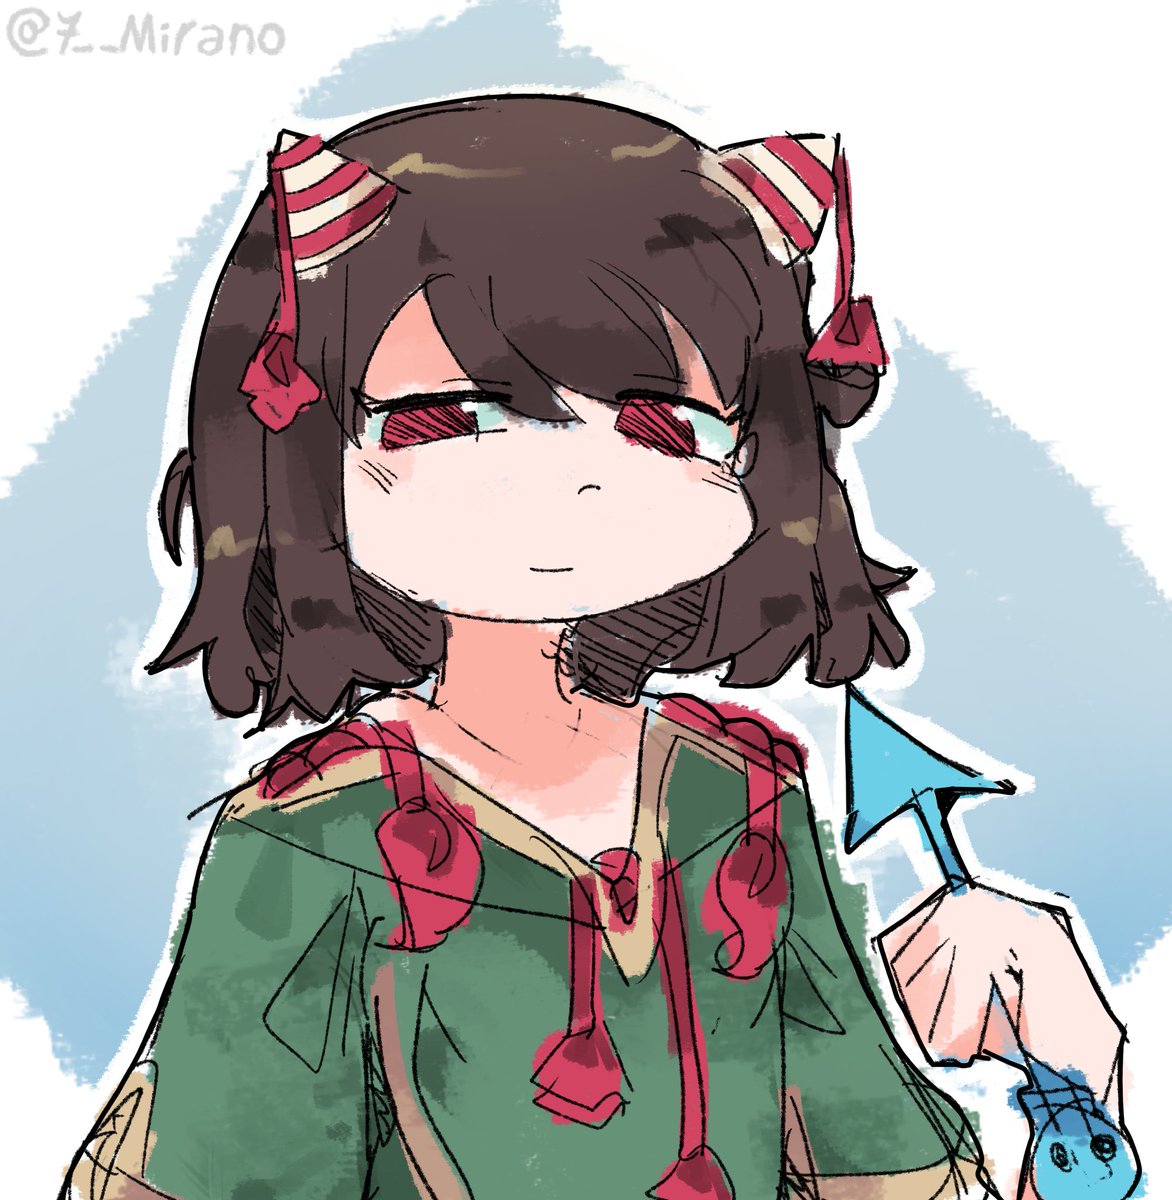 ◆ Zanmu! ◆ Day 191 of daily posting #東方Project #touhou